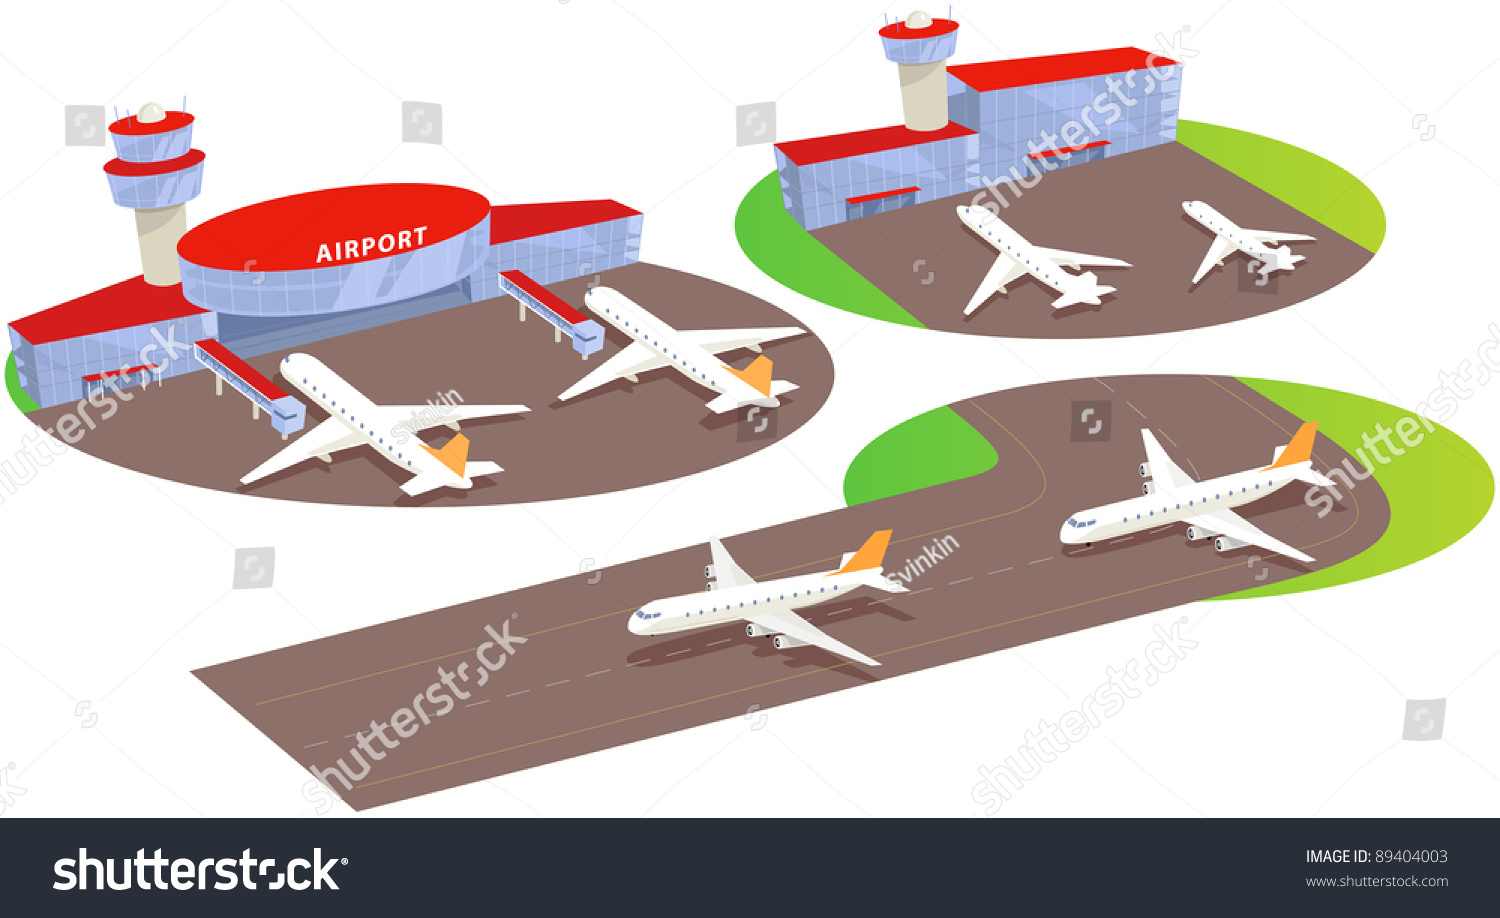 clipart of airport - photo #47